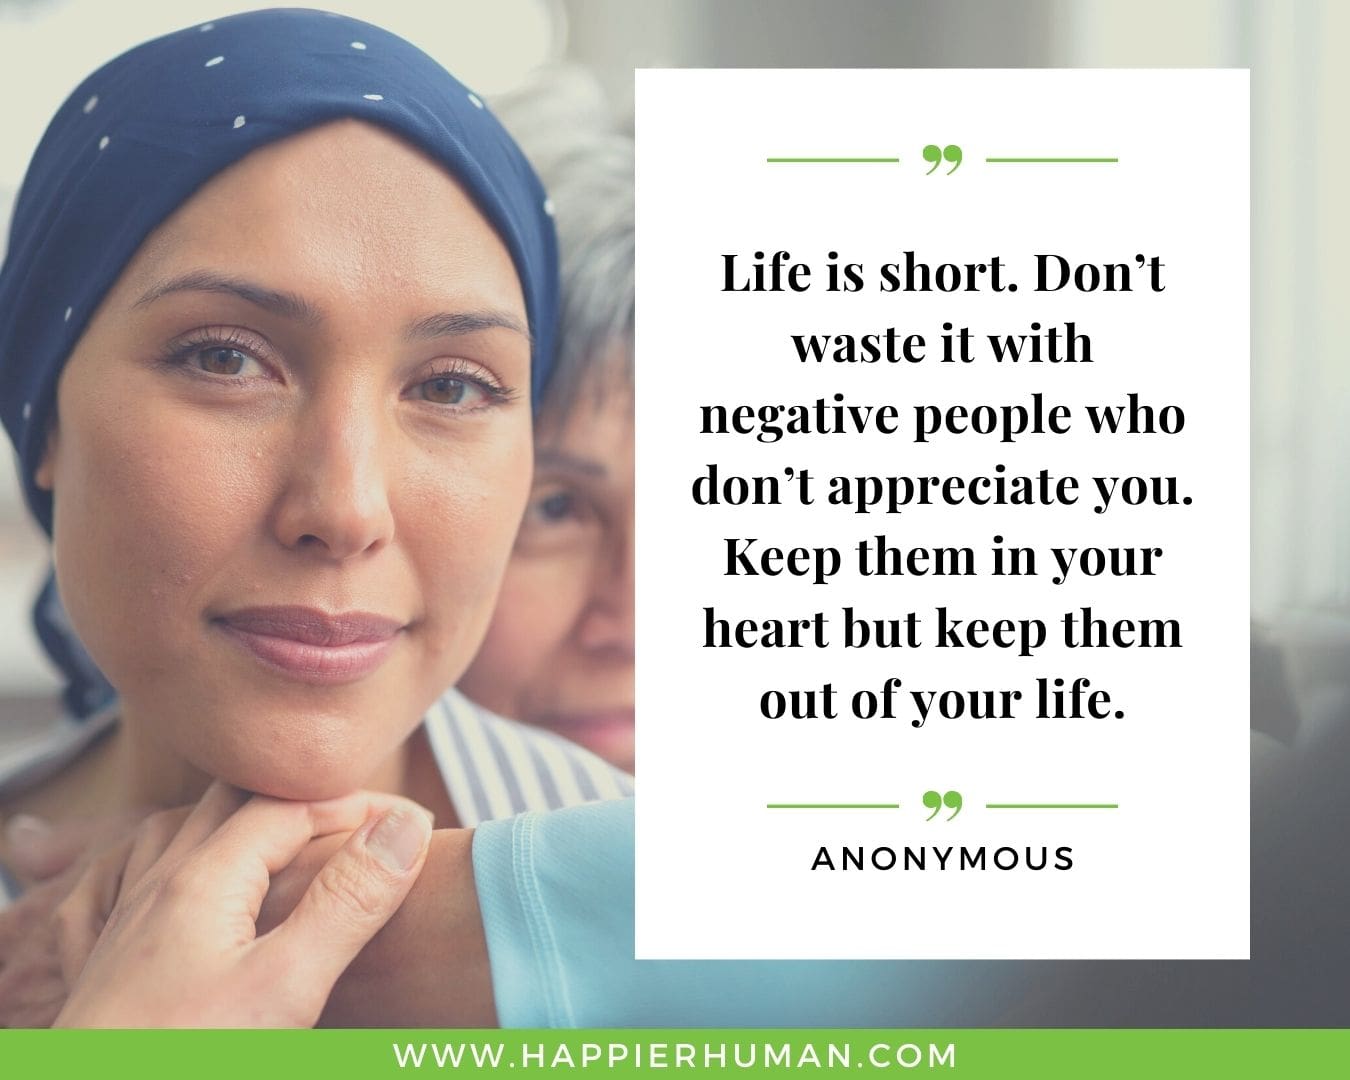 Toxic People Quotes - “Life is short. Don’t waste it with negative people who don’t appreciate you. Keep them in your heart but keep them out of your life.” – Anonymous